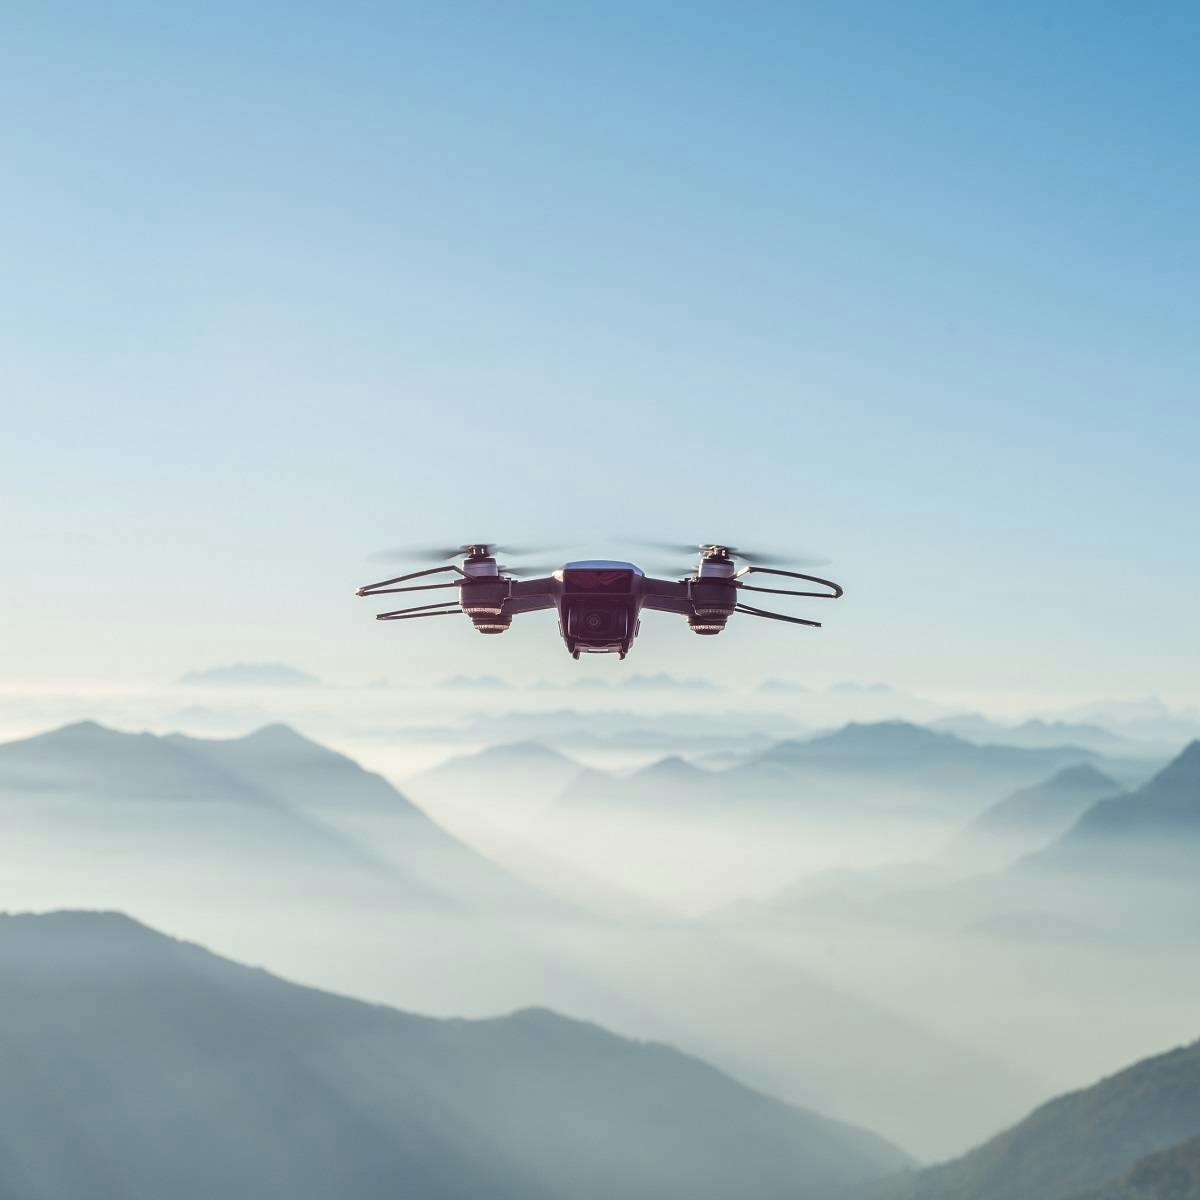 A drone flying over misty mountains